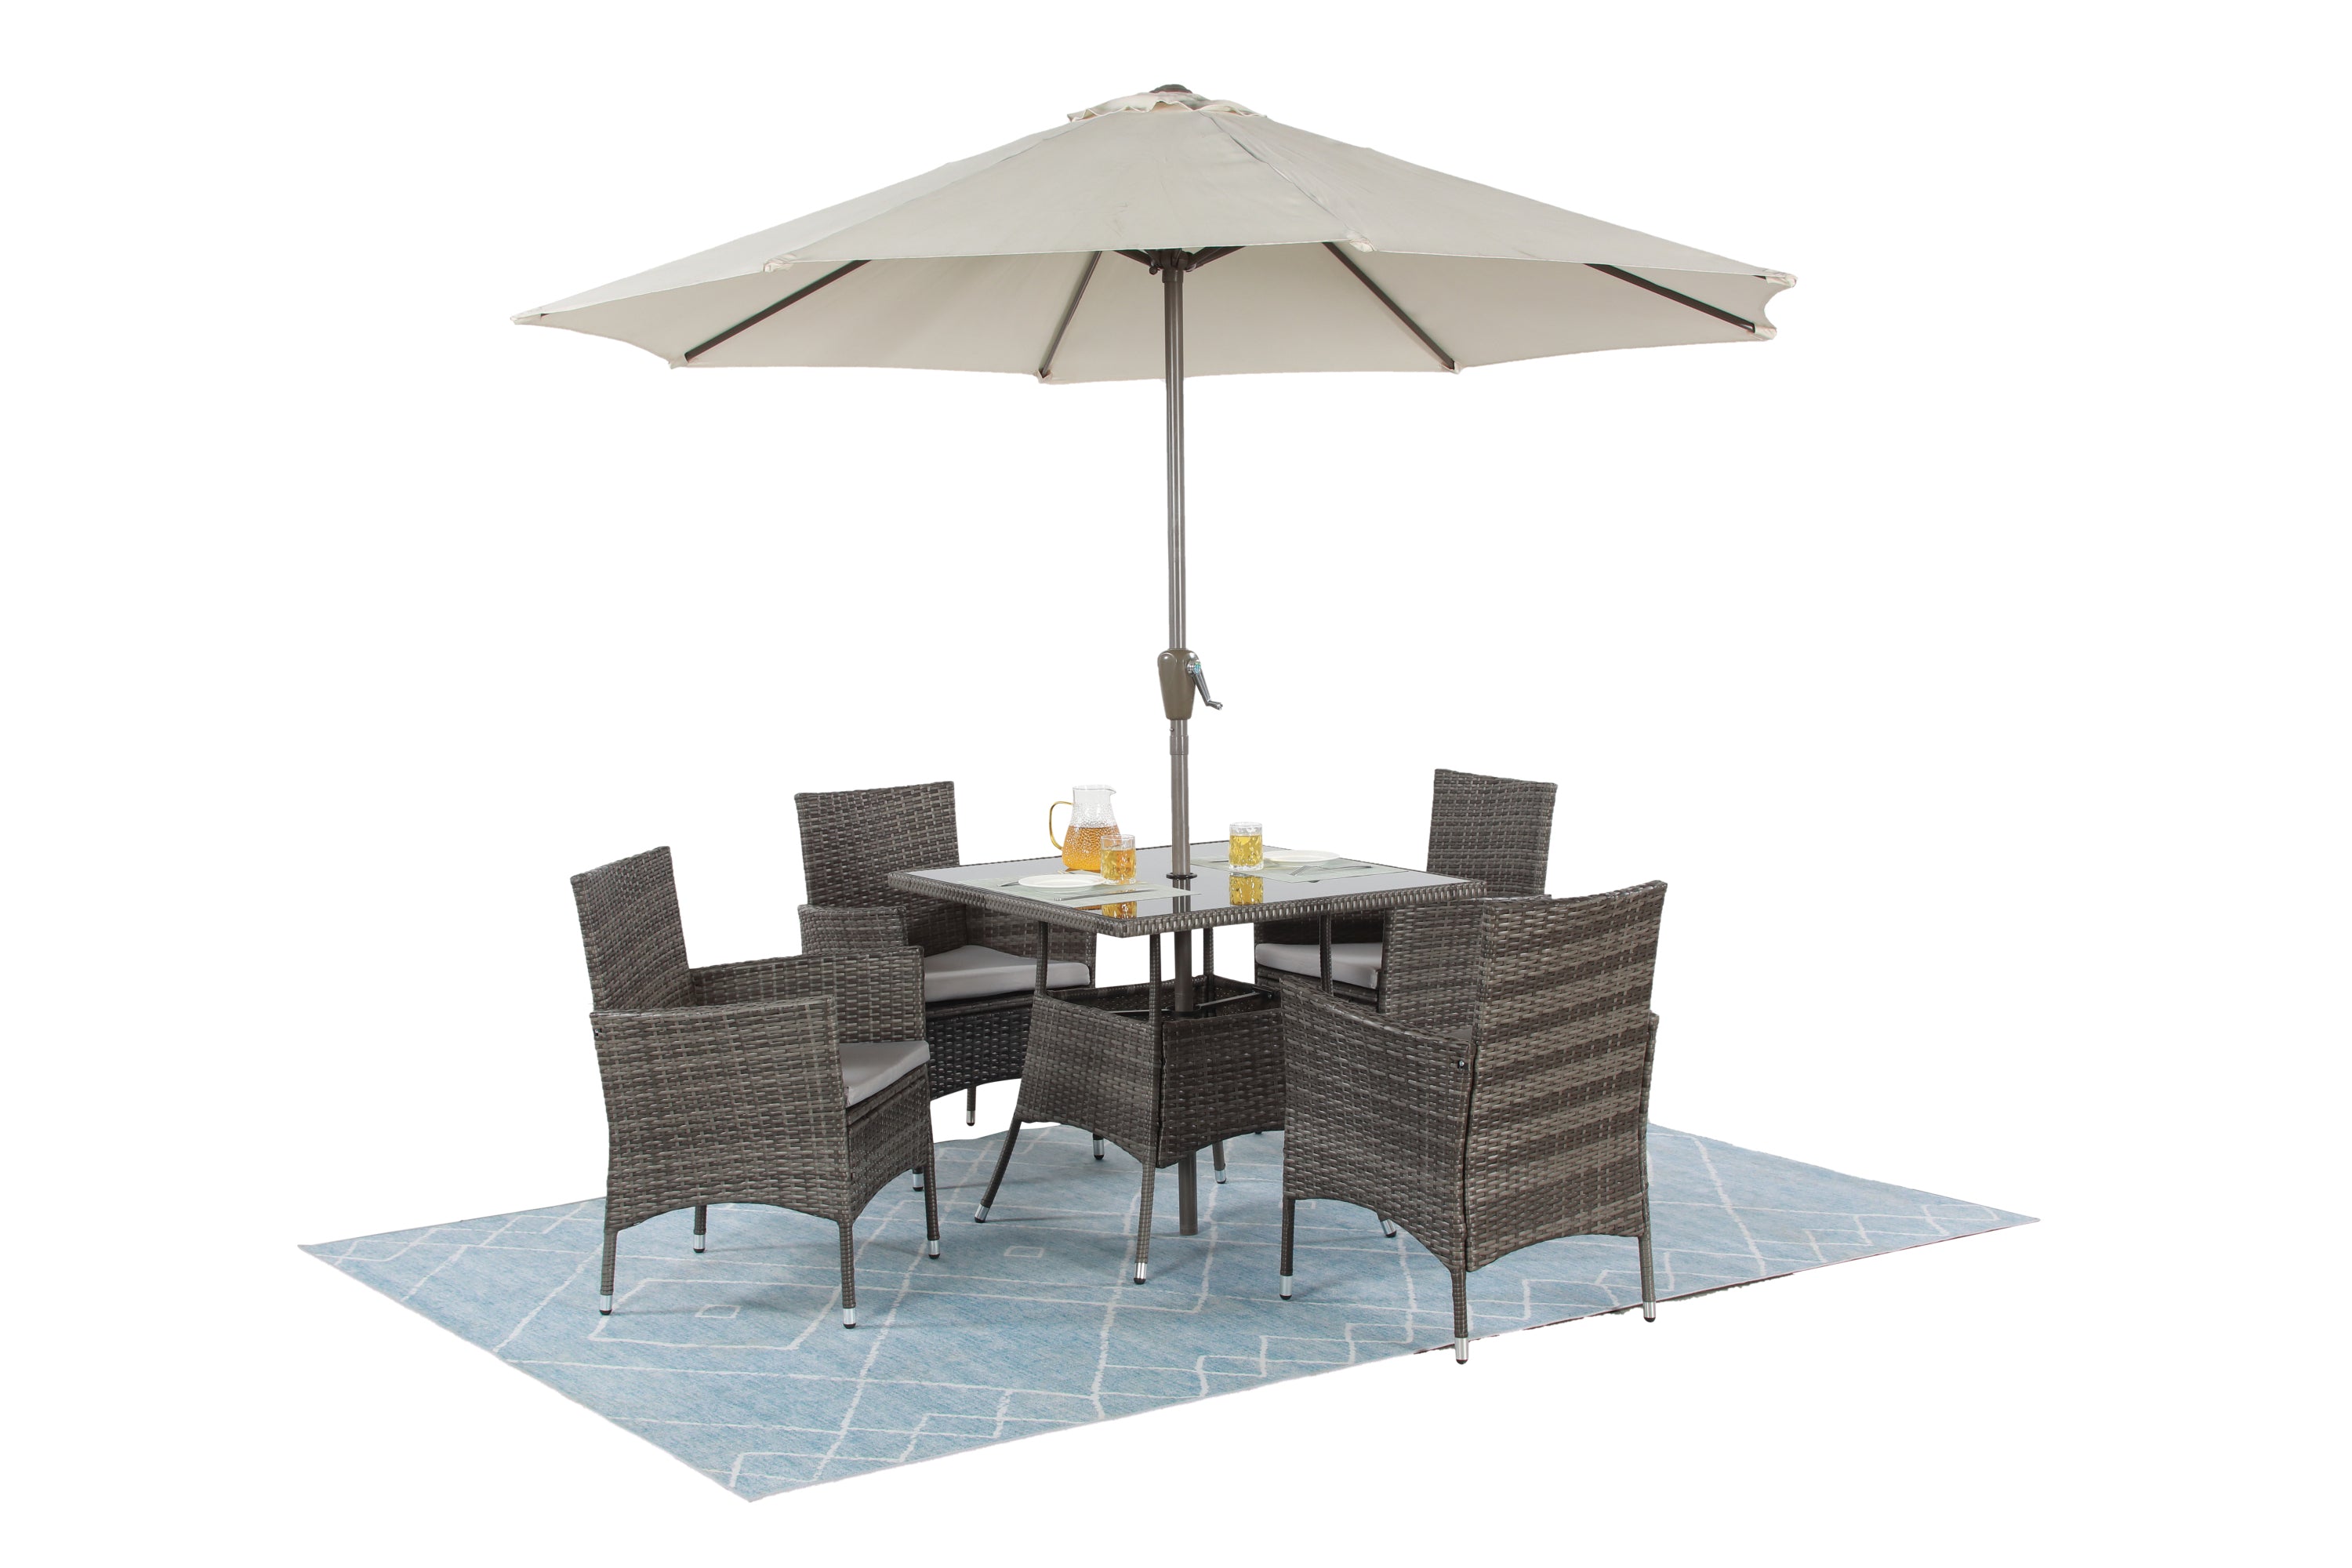 5-Pieces-PE-Rattan-Wicker-Patio-Dining-Set-with-Grey-Cushions-Furniture-|-Outdoor-Furniture-|-Outdoor-Furniture-Sets